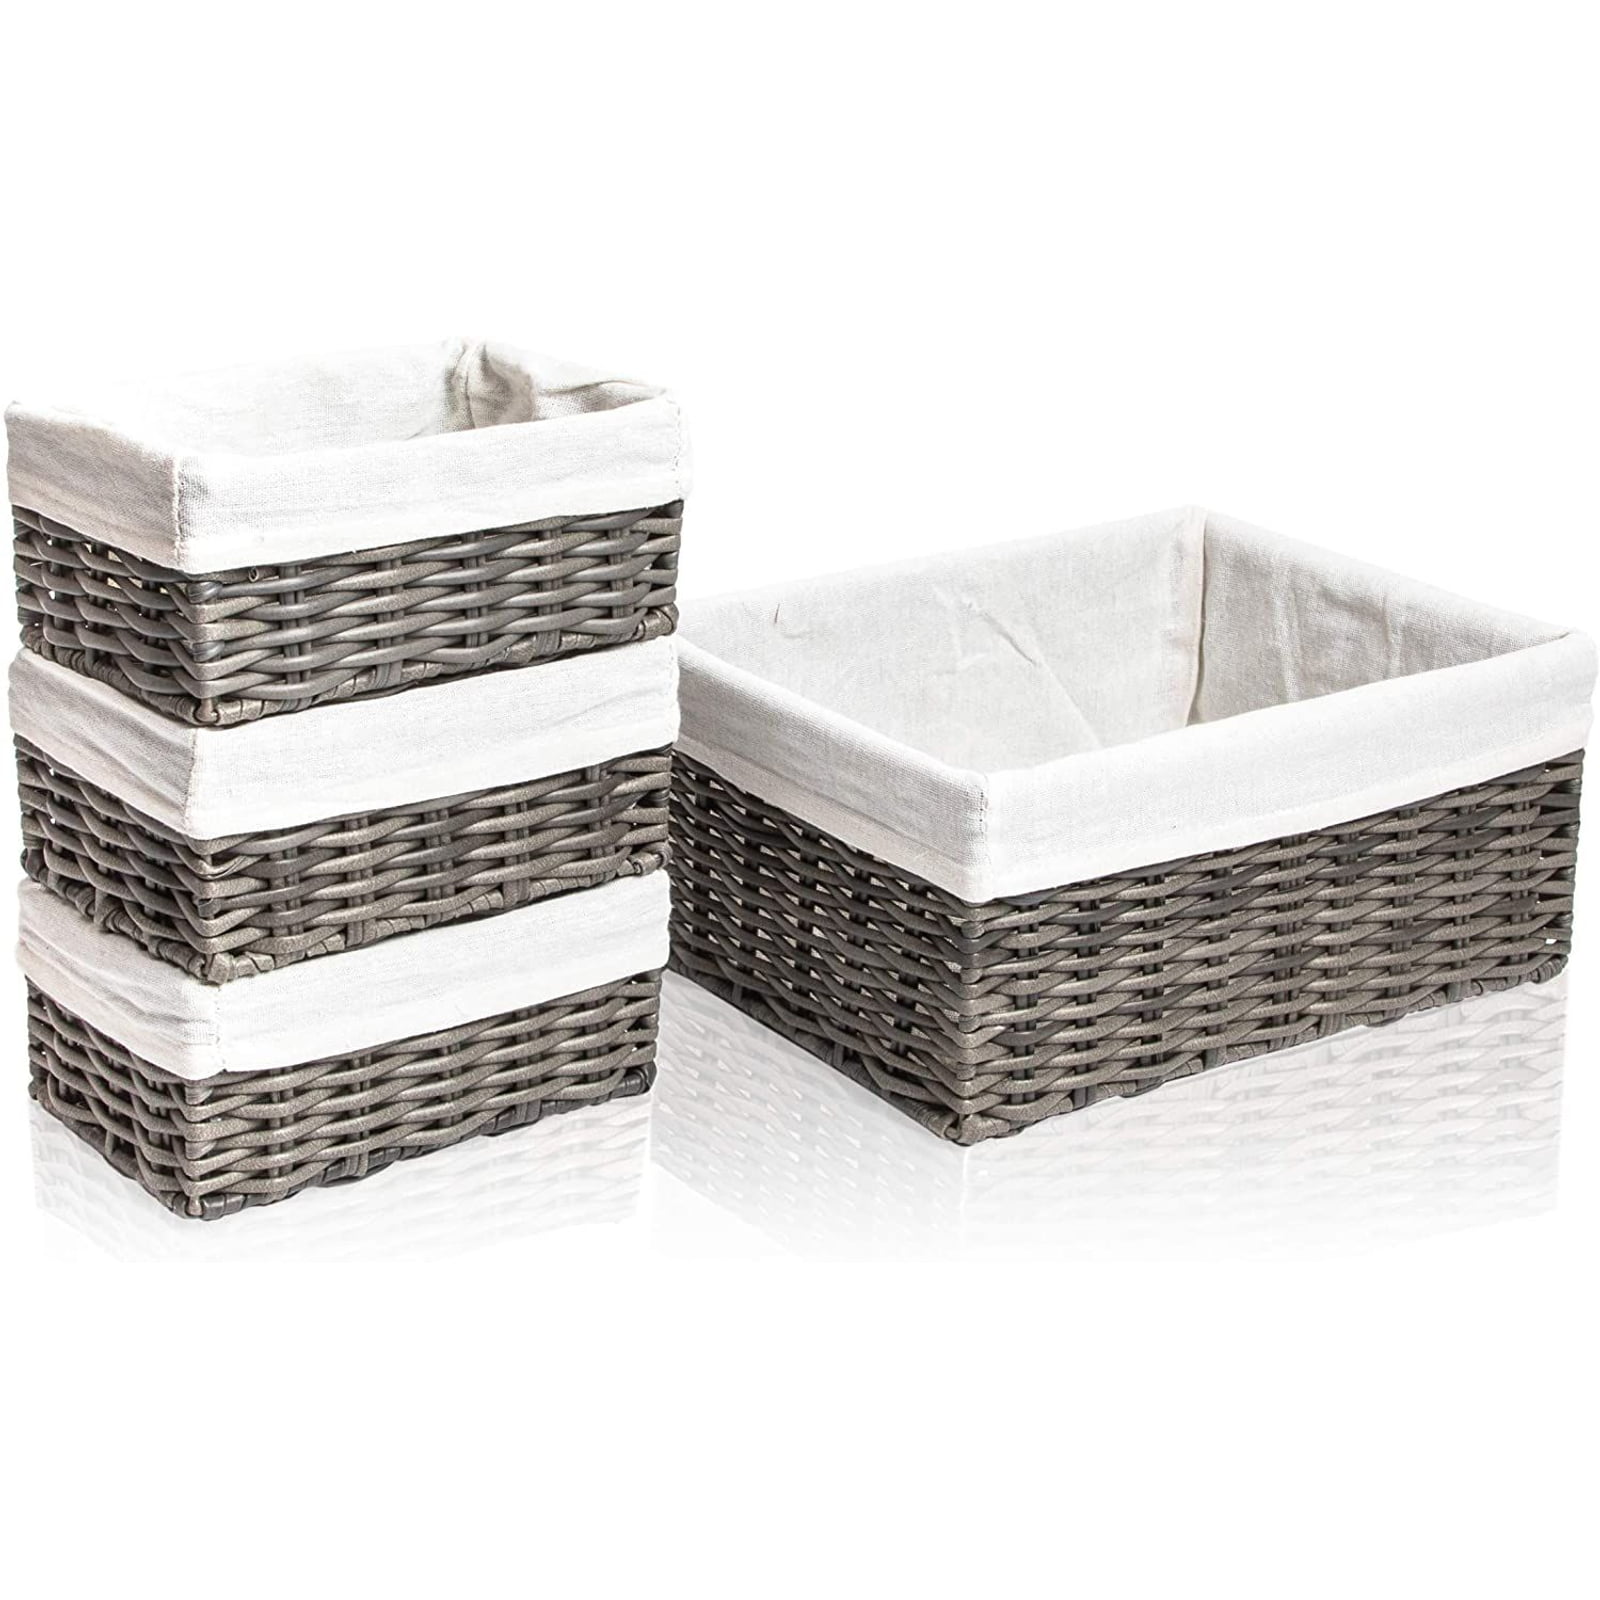 Toys Beiger Storage Containers 1 Large Juvale Magazines Storage Basket Books 4-Piece Nesting Baskets 3 Small Wicker Corn Rope Decorative Organizing Baskets for Shelves Storage Bins Set